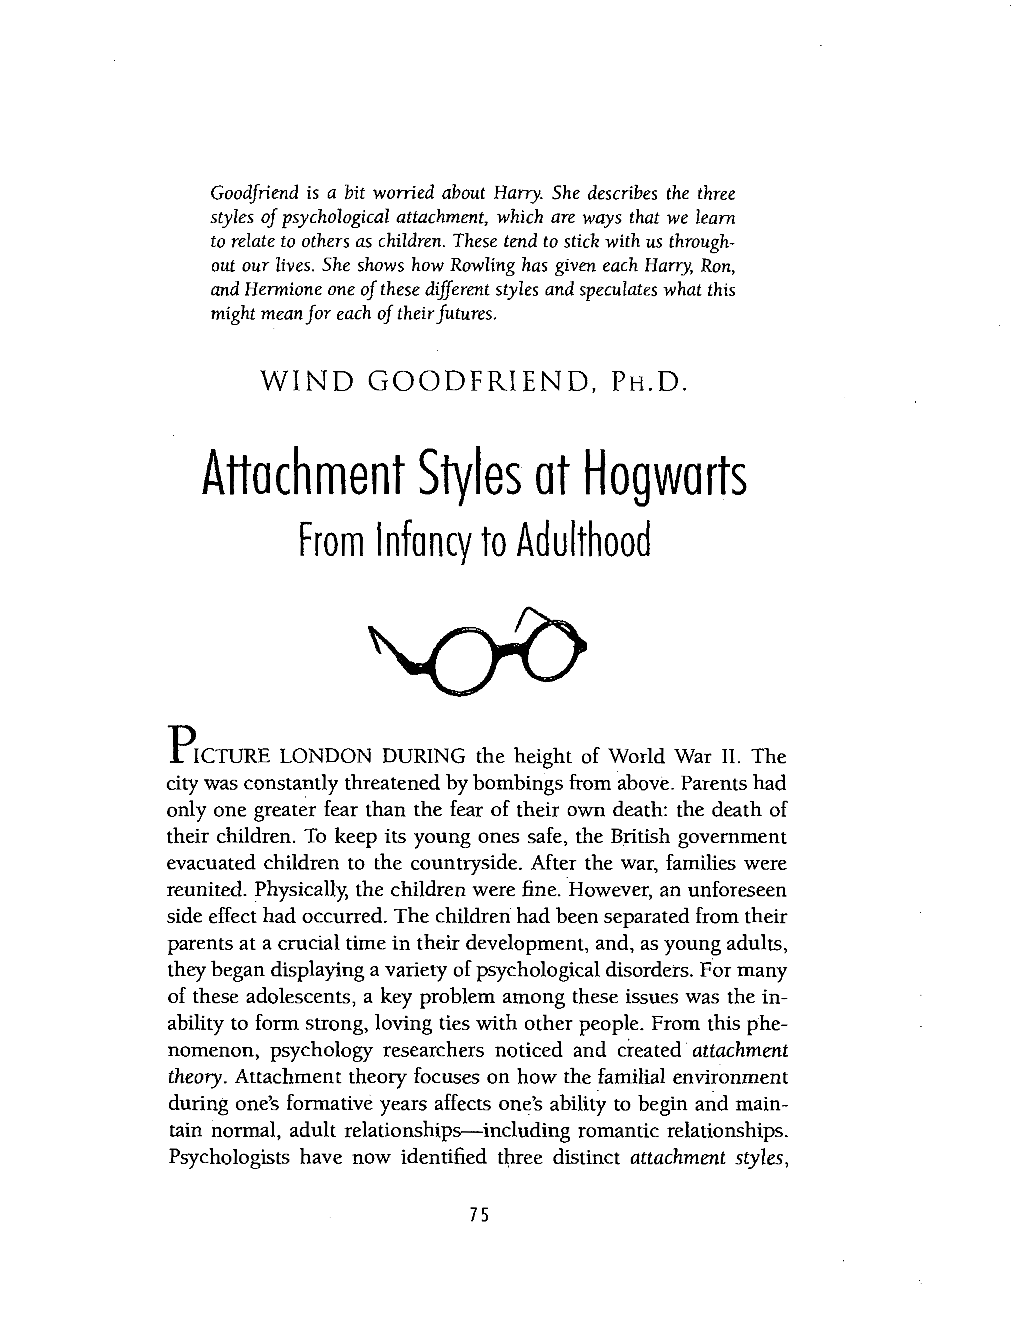 Harry Potter and Attachment Theories